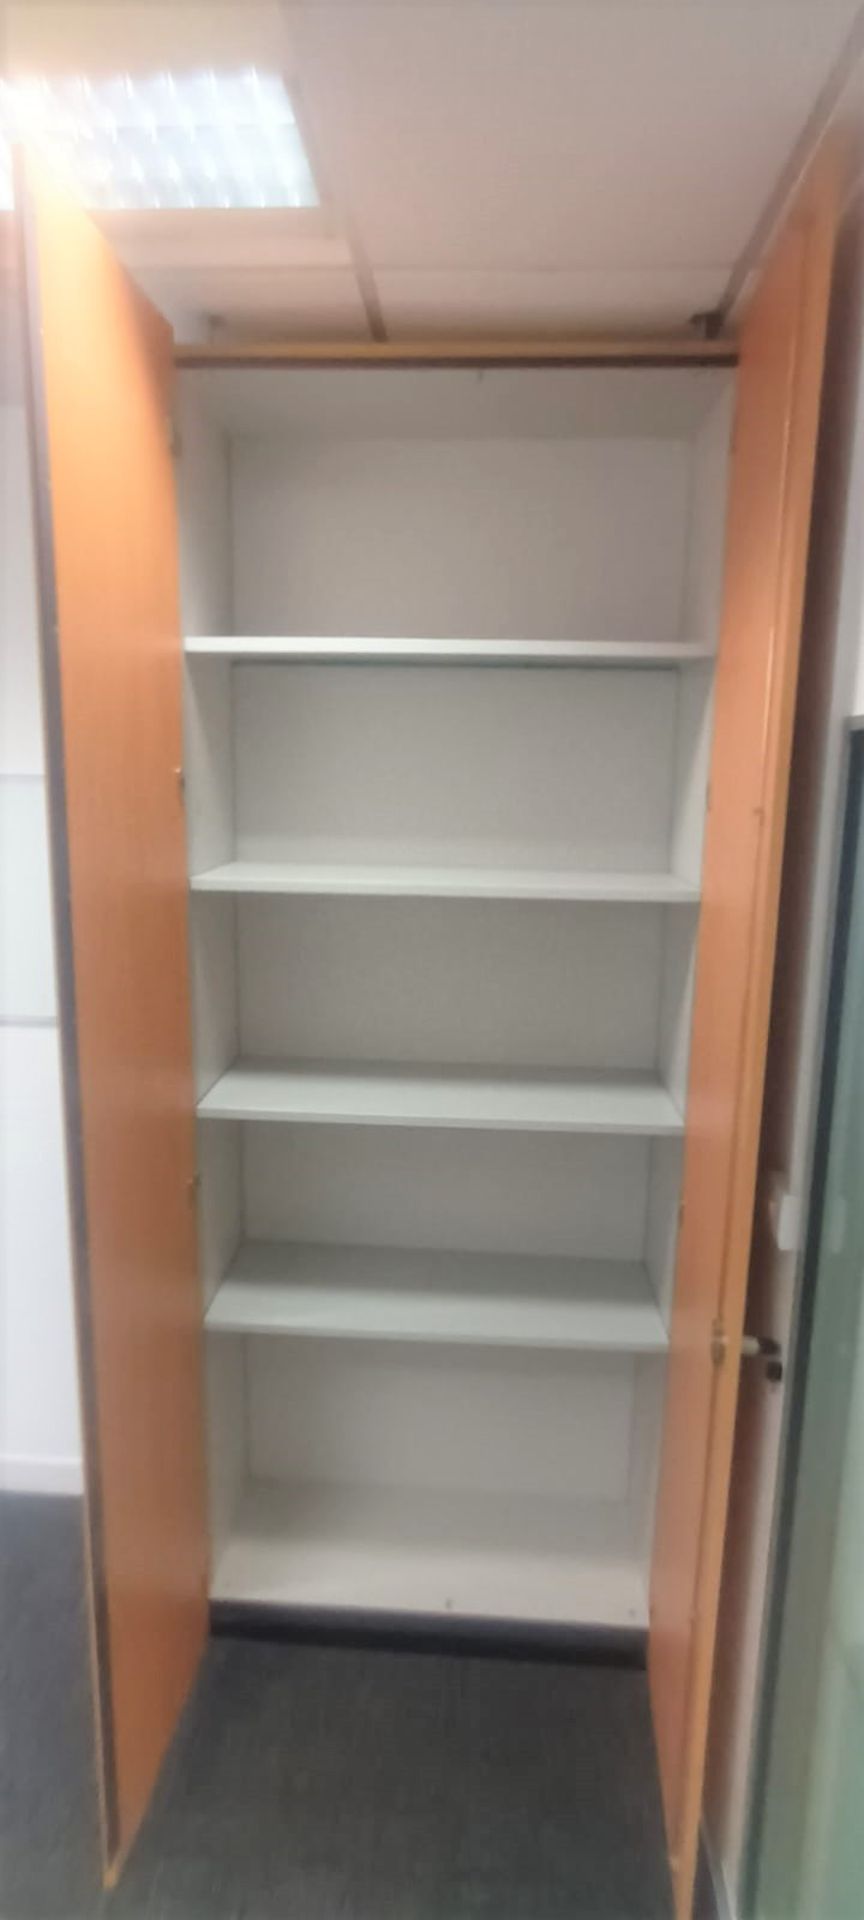 1 x Two Door Office Storage Caninet With Internal Shelves - Ref: TV504 - Size: 140 x 200 x 45 - Image 2 of 2